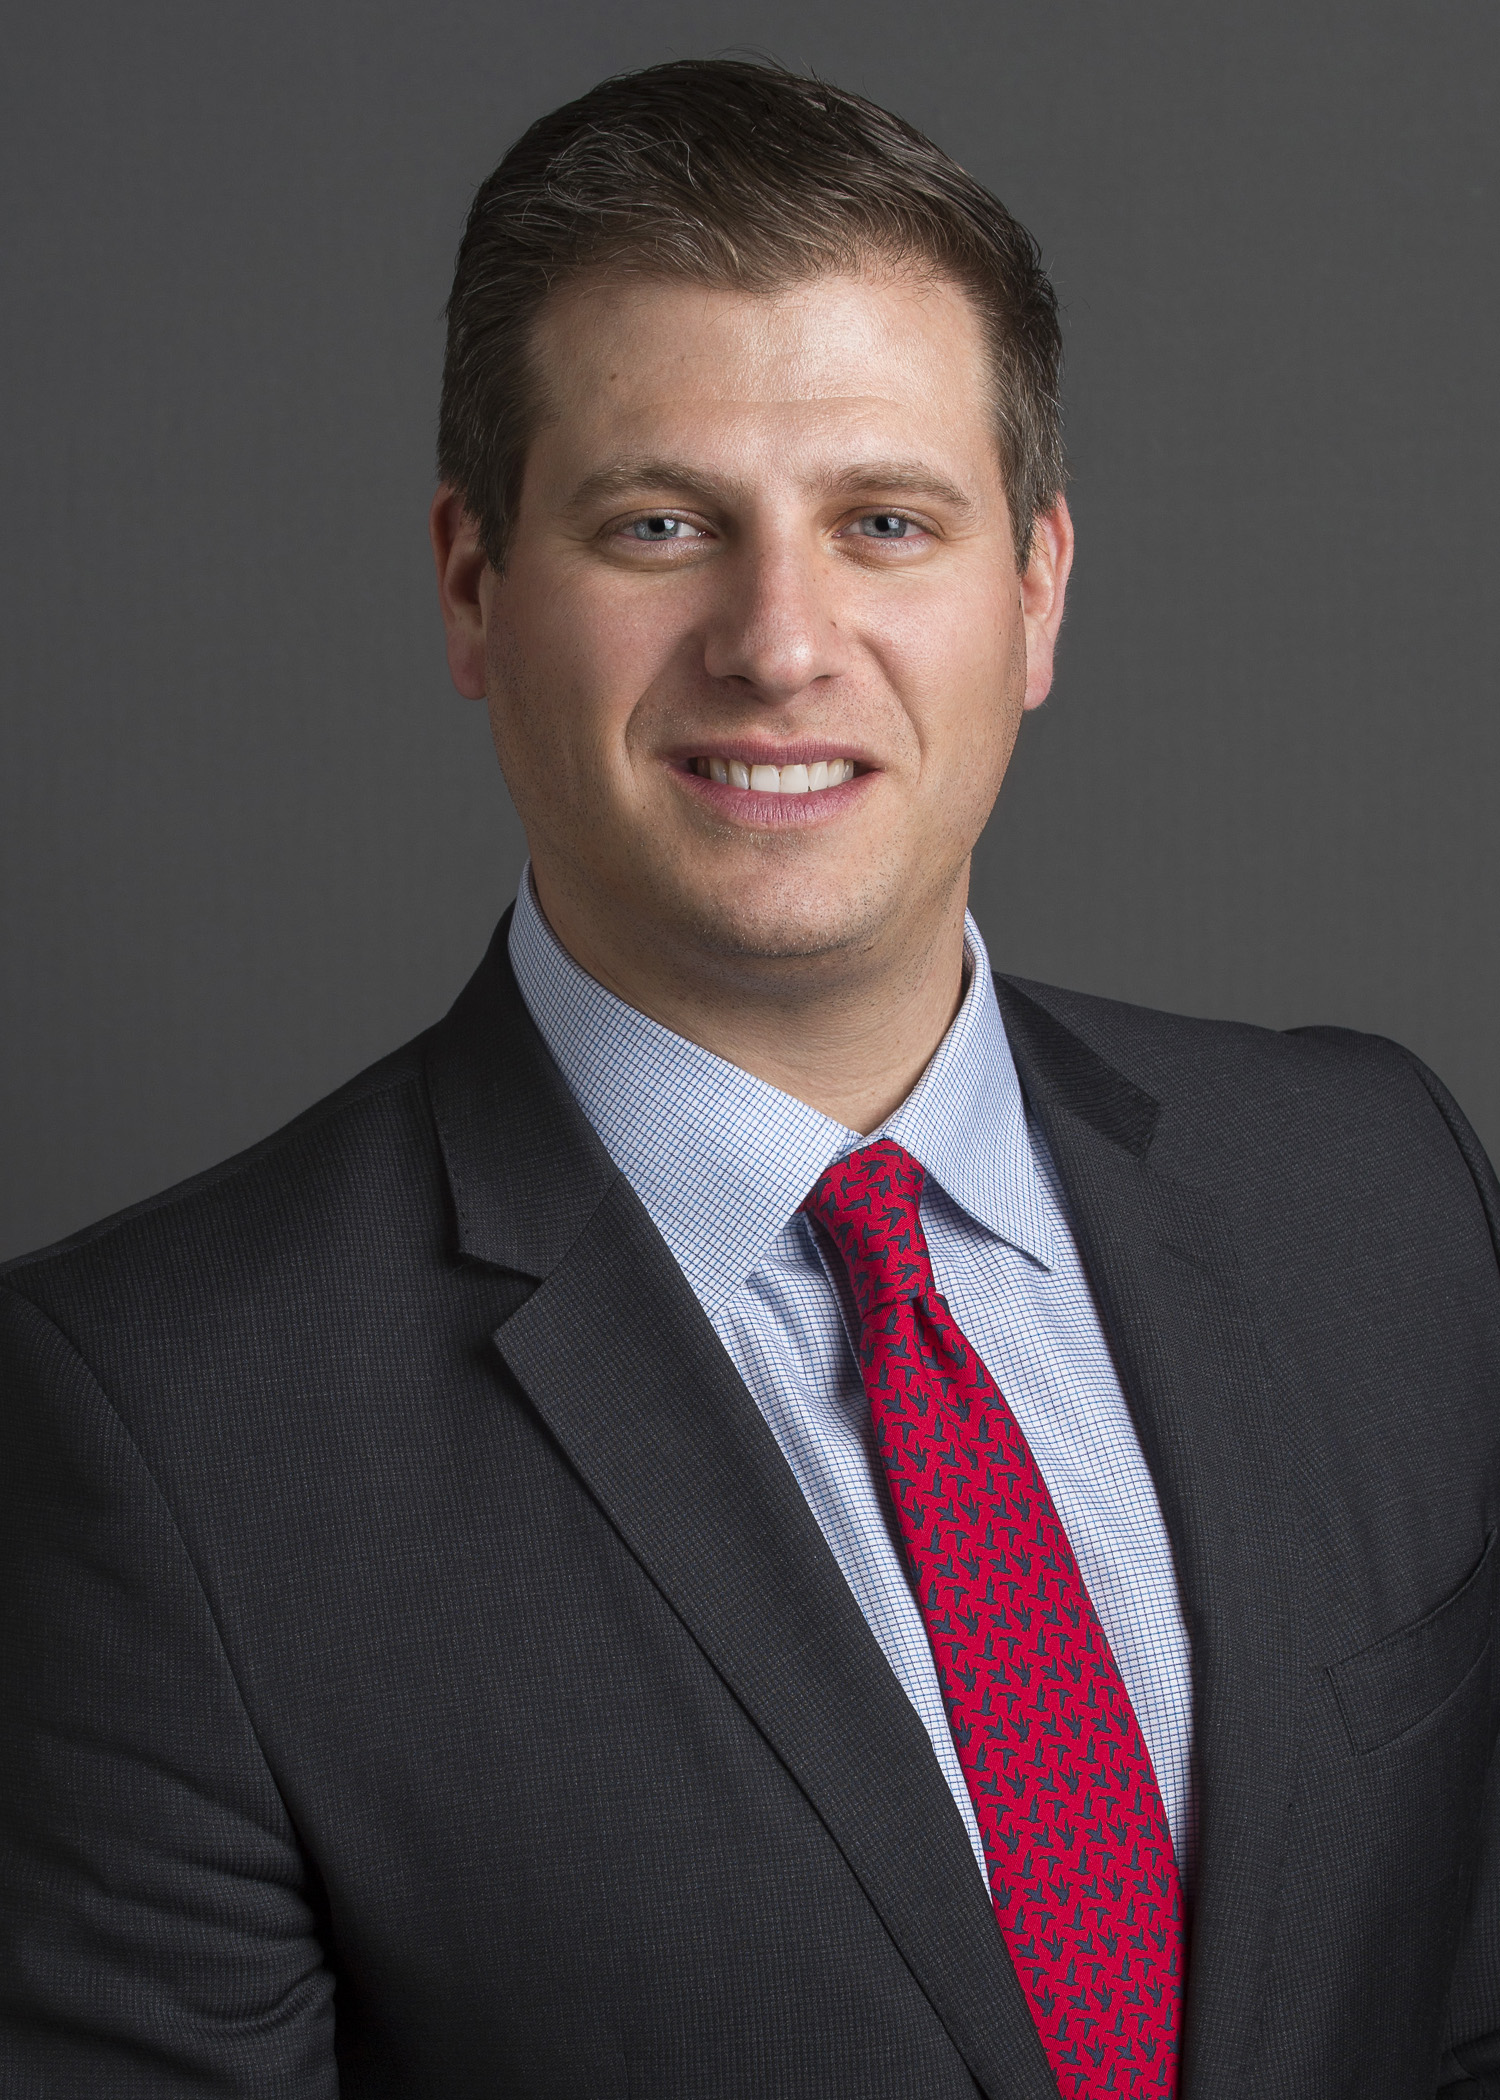 Seth Michaelson is heading up Catto & Catto's Houston office.